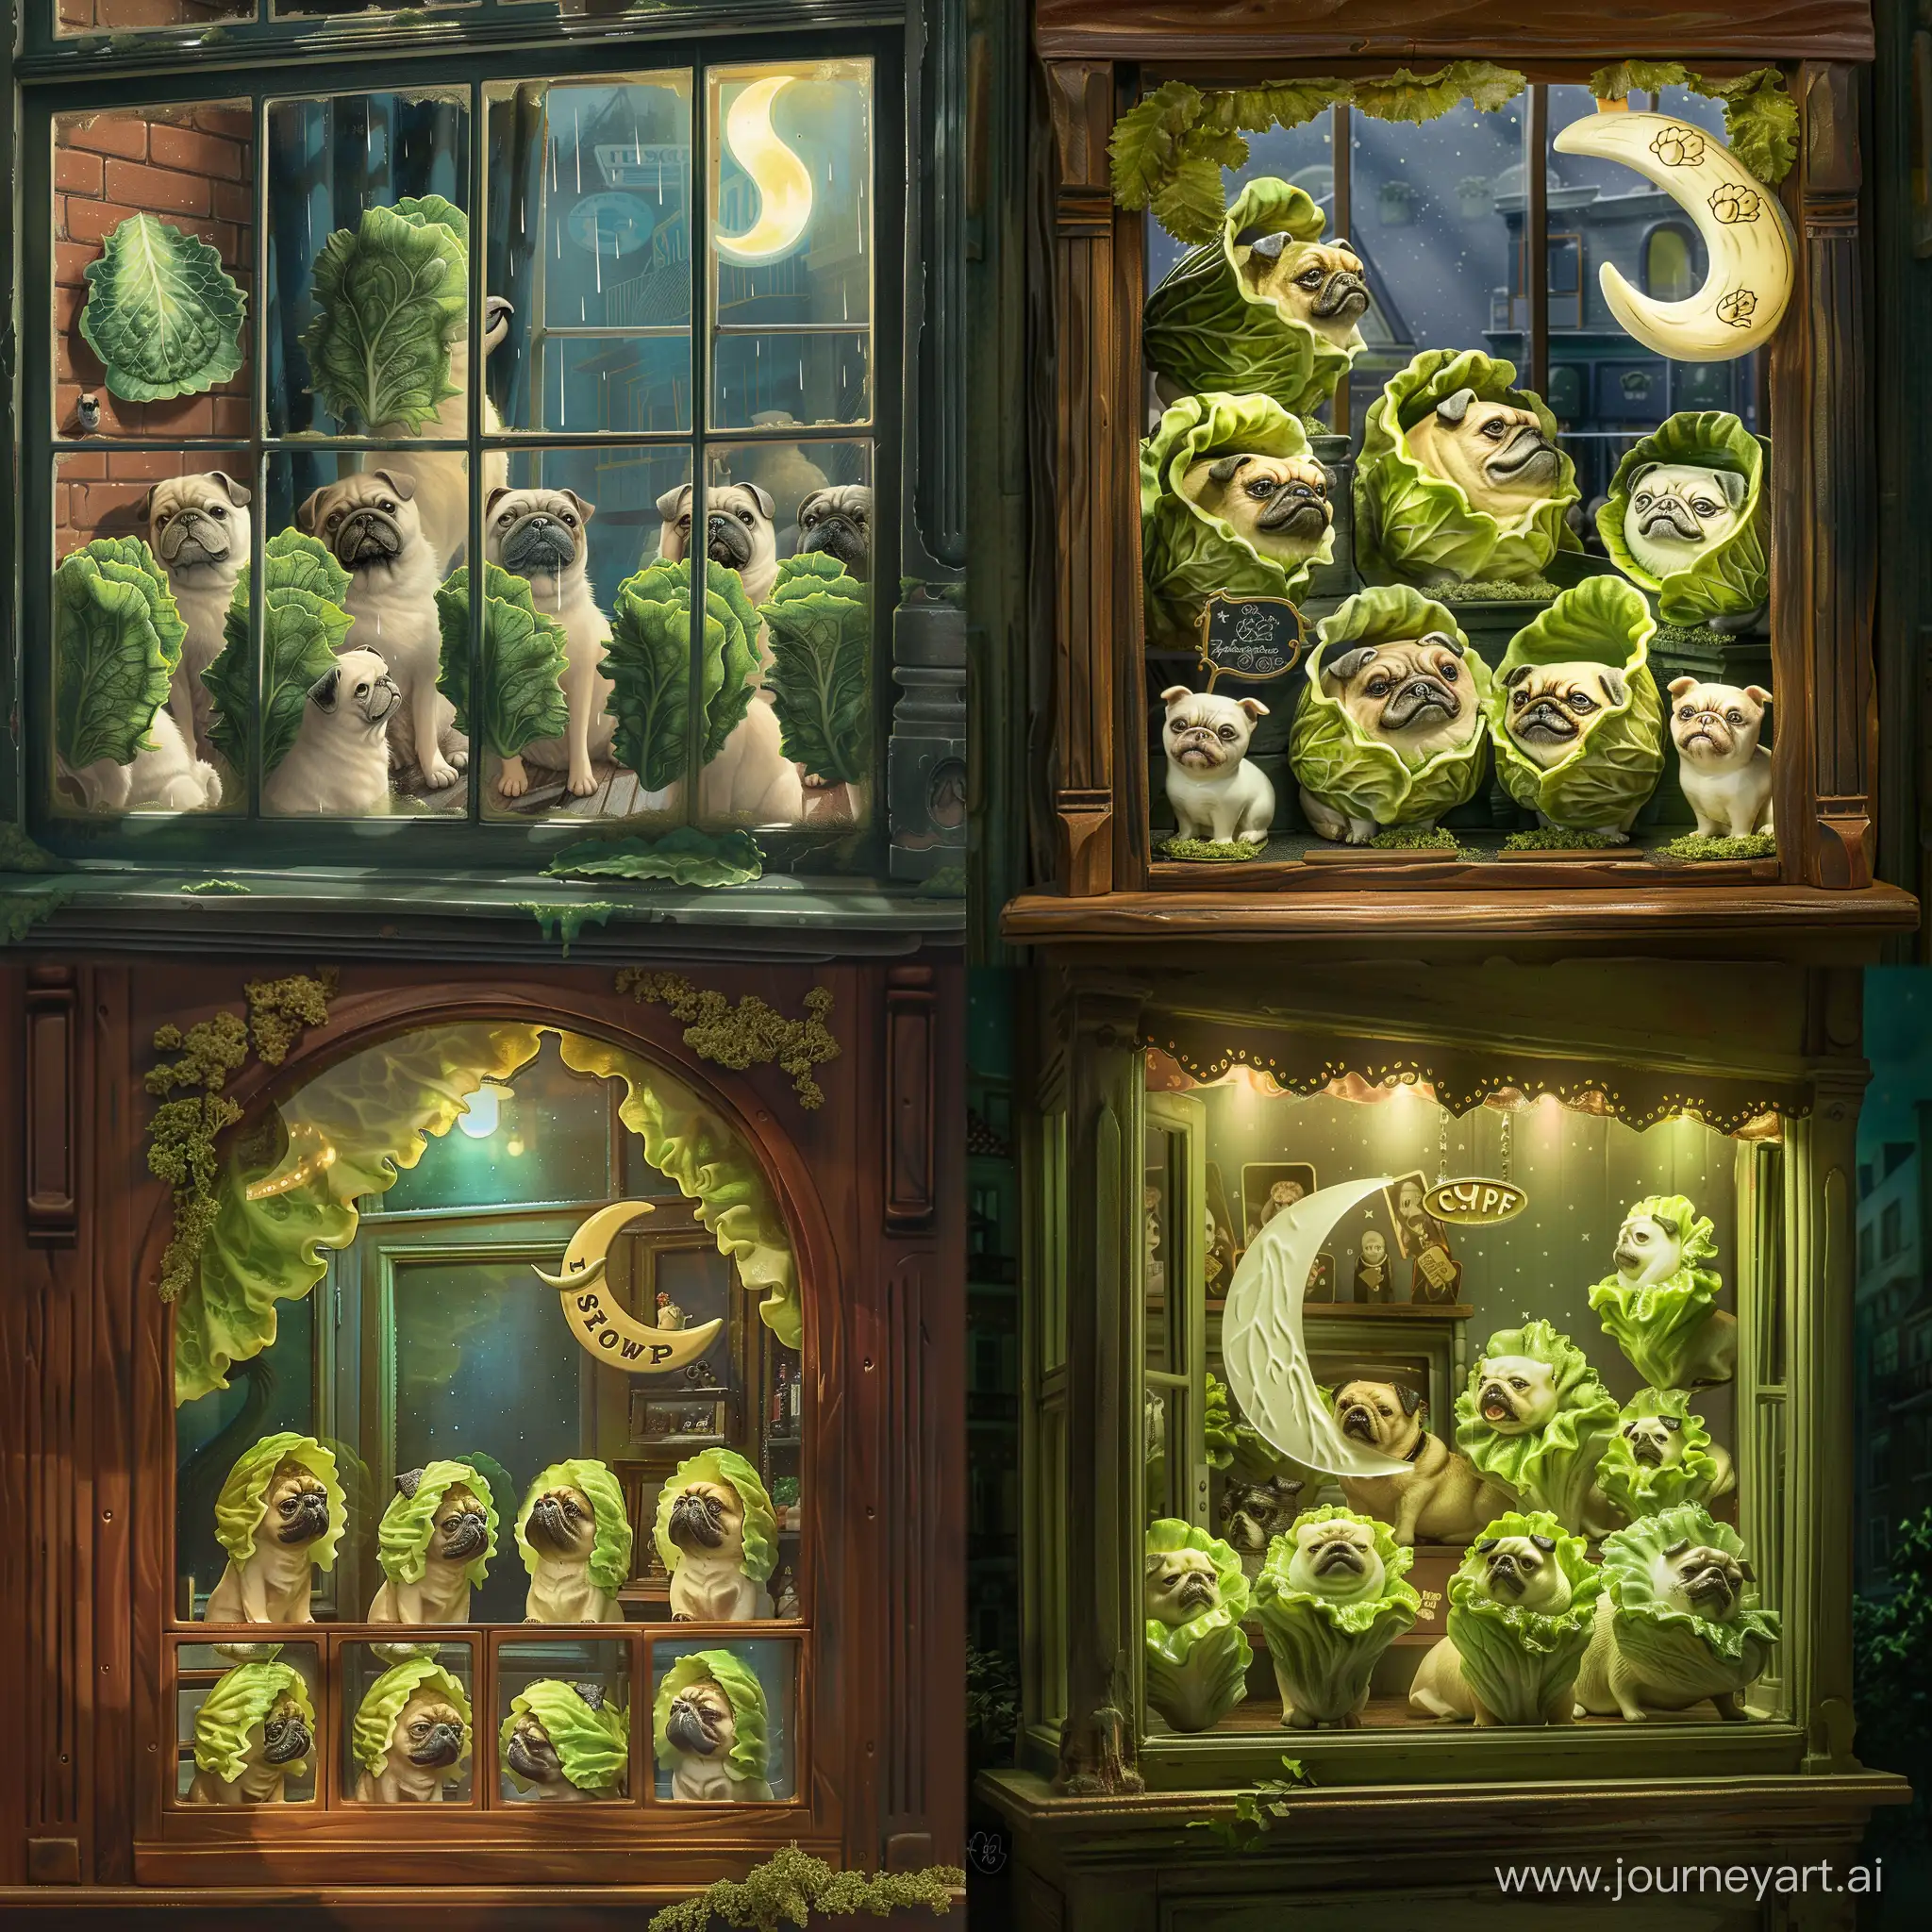 Curious-Dog-Observing-Grumpy-Lettuce-Pug-Dog-Statues-in-Moonlit-Store-Window-Display